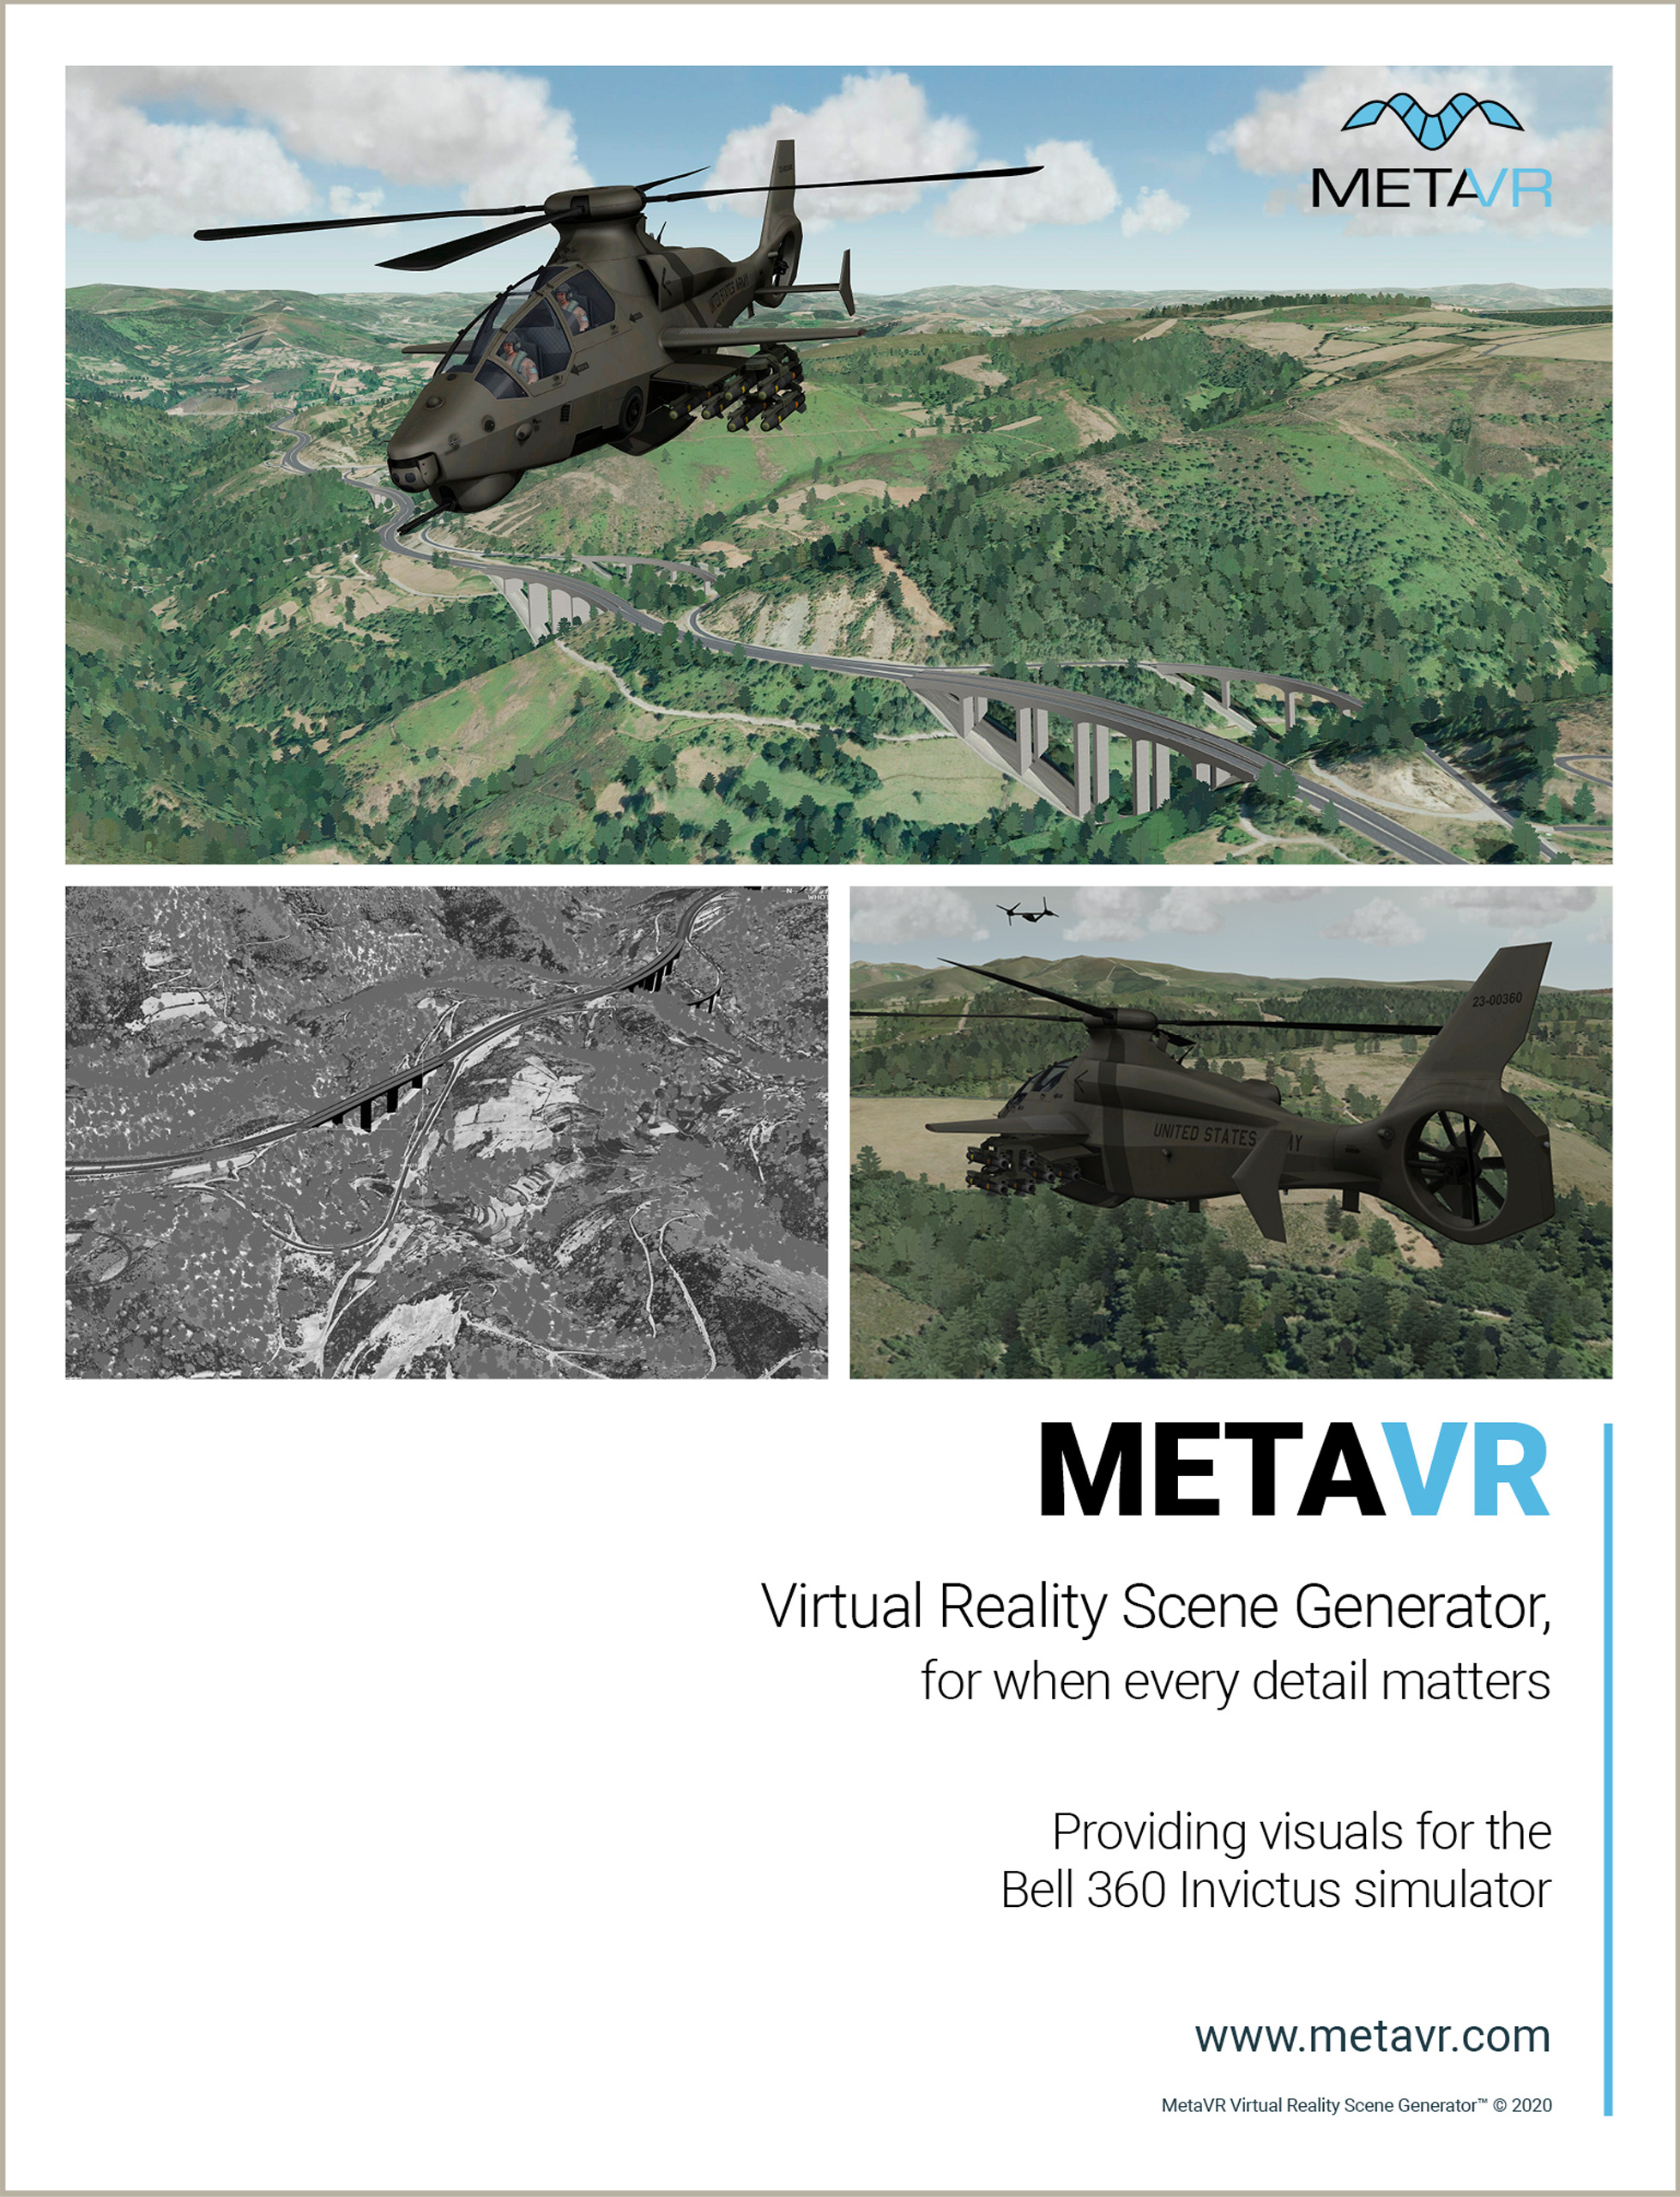 MetaVR Ad in July 2020 issue of Shephard's Military Training